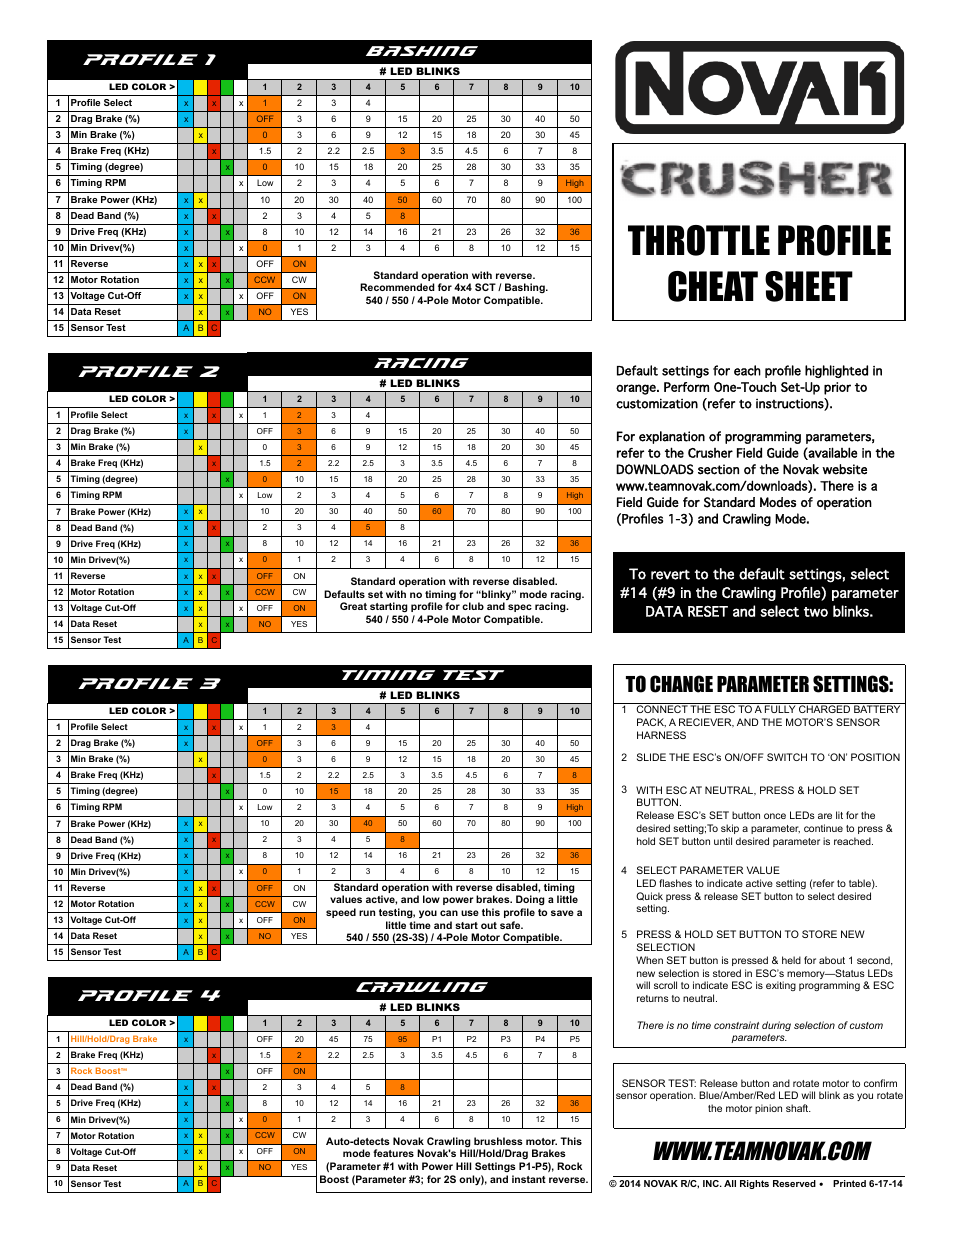 Brushless Speed Control: Crusher Simple-Tuner Profile Cheat Sheet (14)